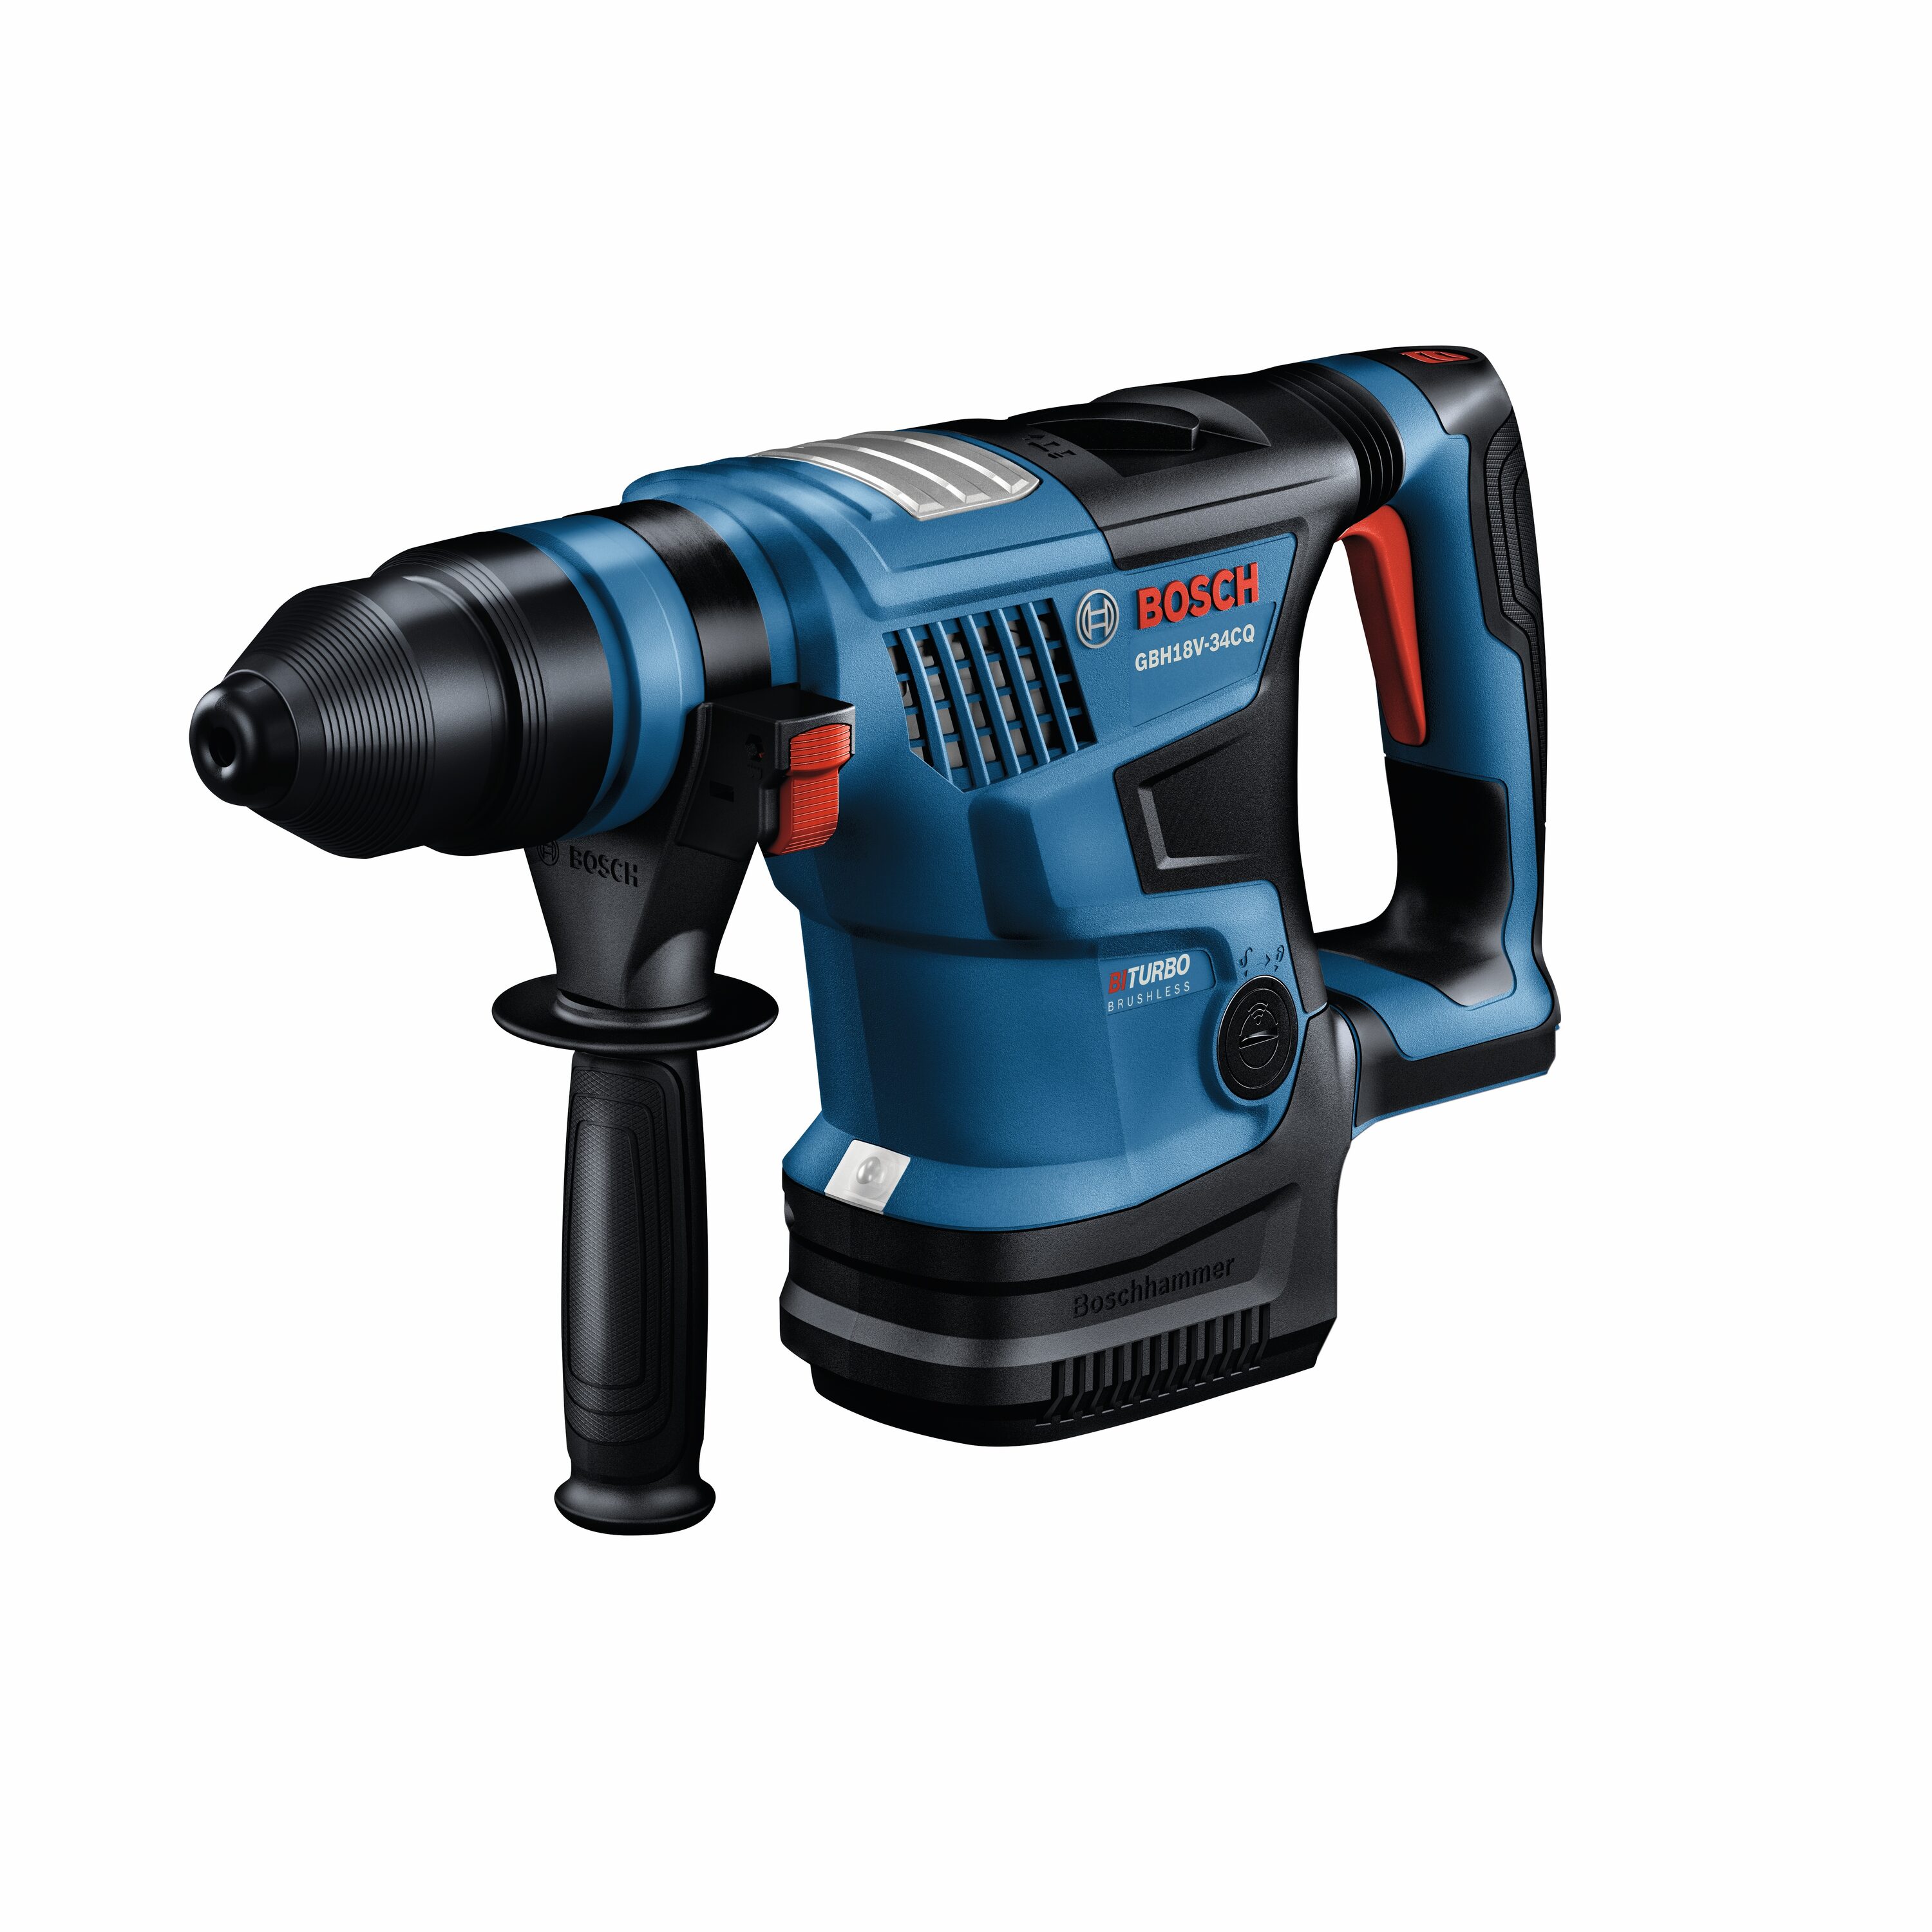 Buy Bosch GBH 18V-21 Professional from £142.99 (Today) – Best Deals on